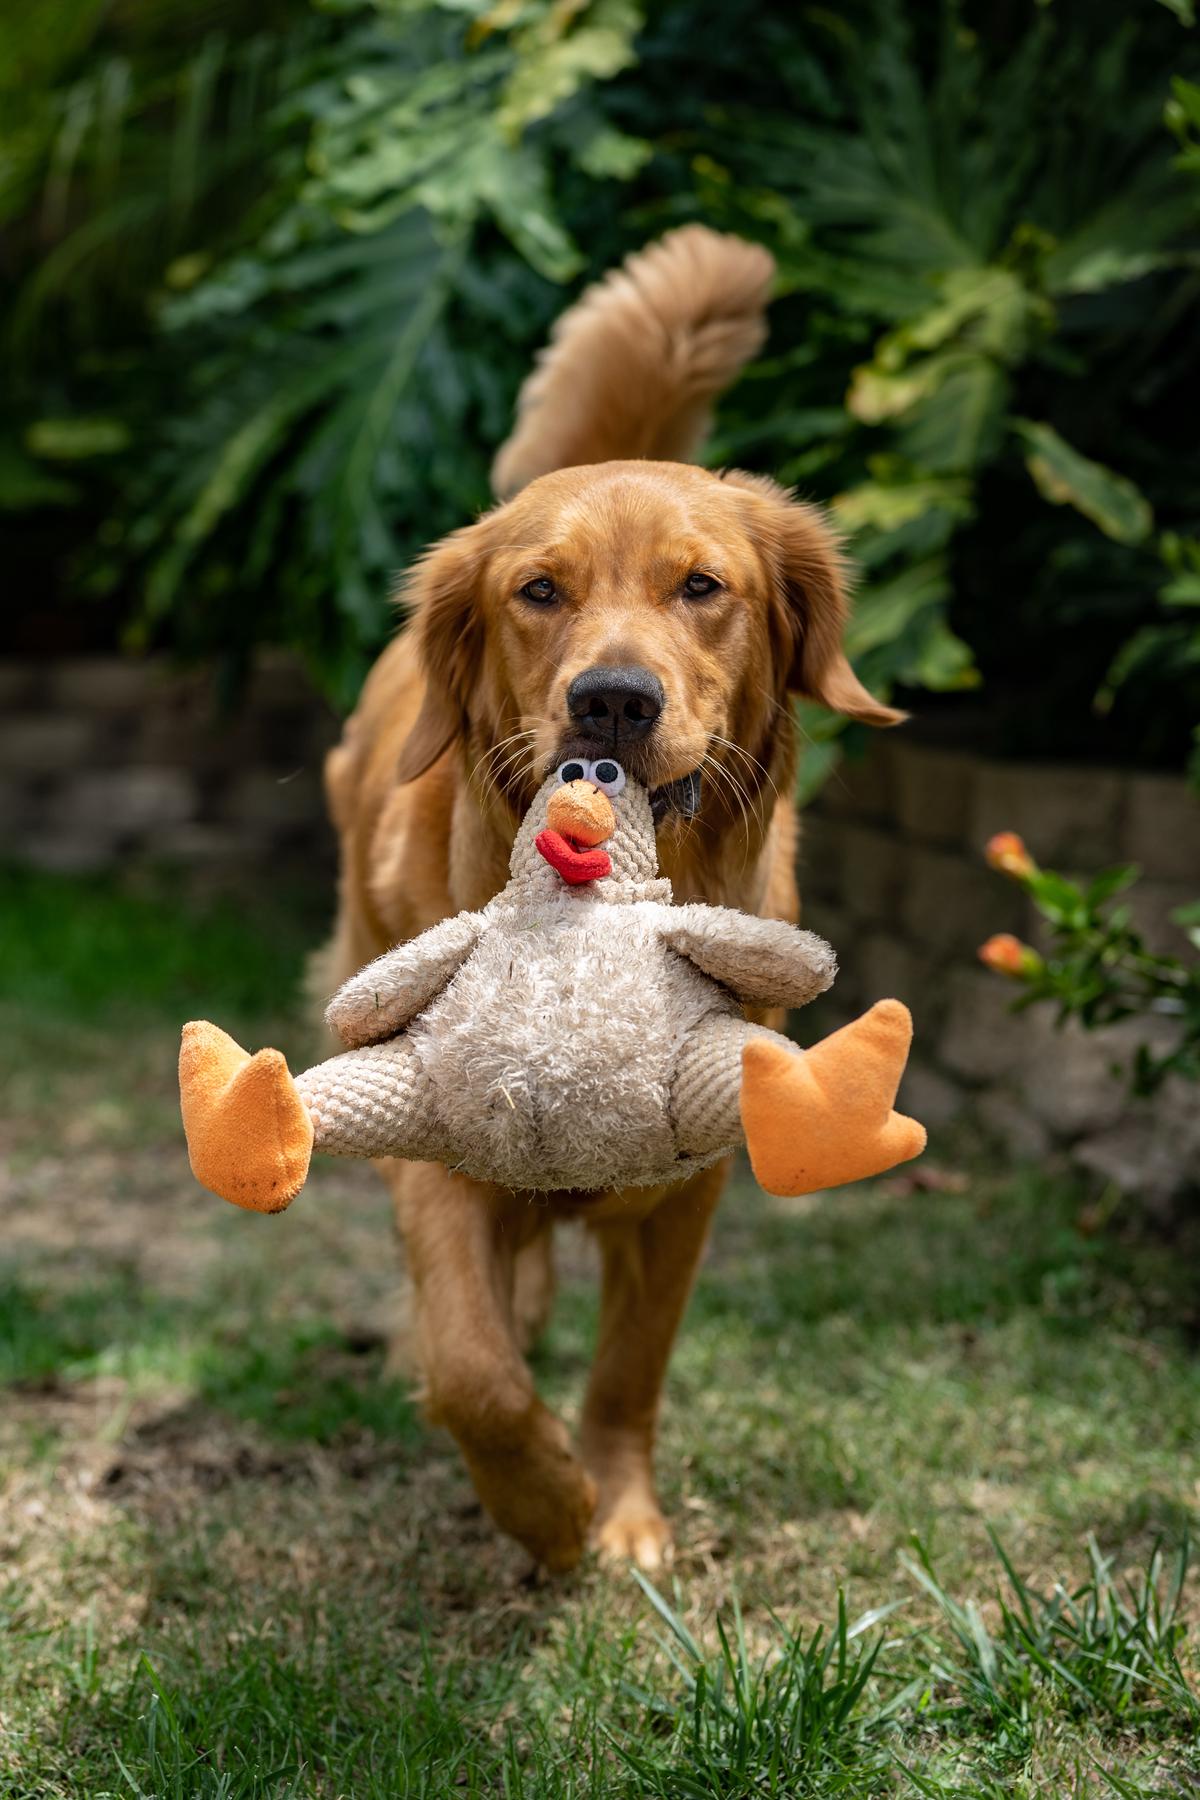 A picture of a Cockapoo with dog toys and treats standing near a group of people in a park and another dog.